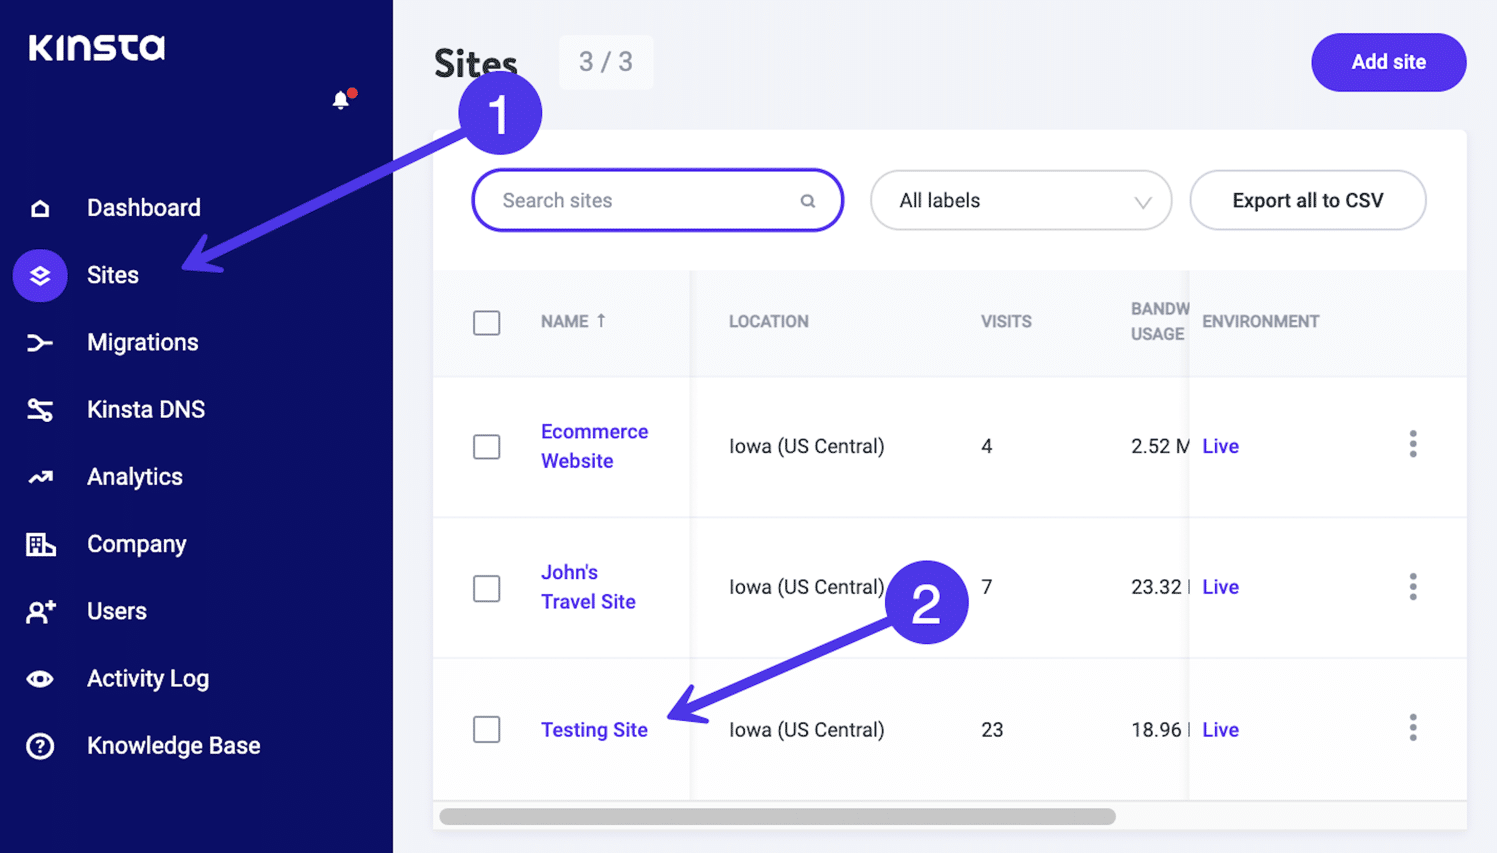 In MyKinsta, click on Sites, then choose the site you want to connect to.